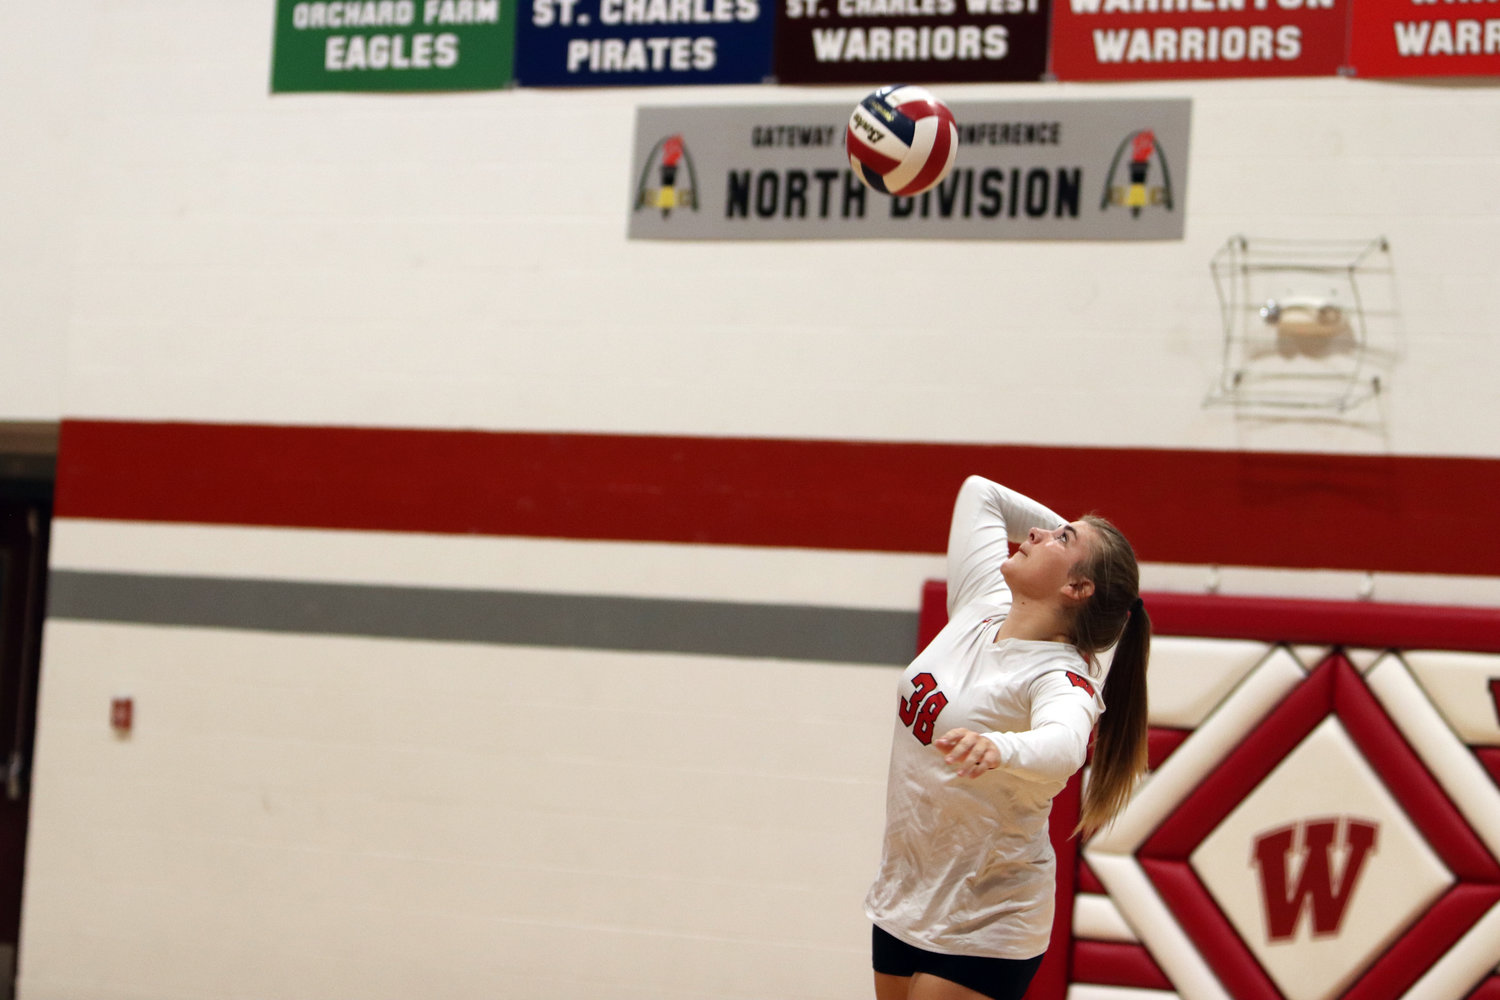 Harley Taylor hits a serve during Warrenton’s win over St. Charles West.